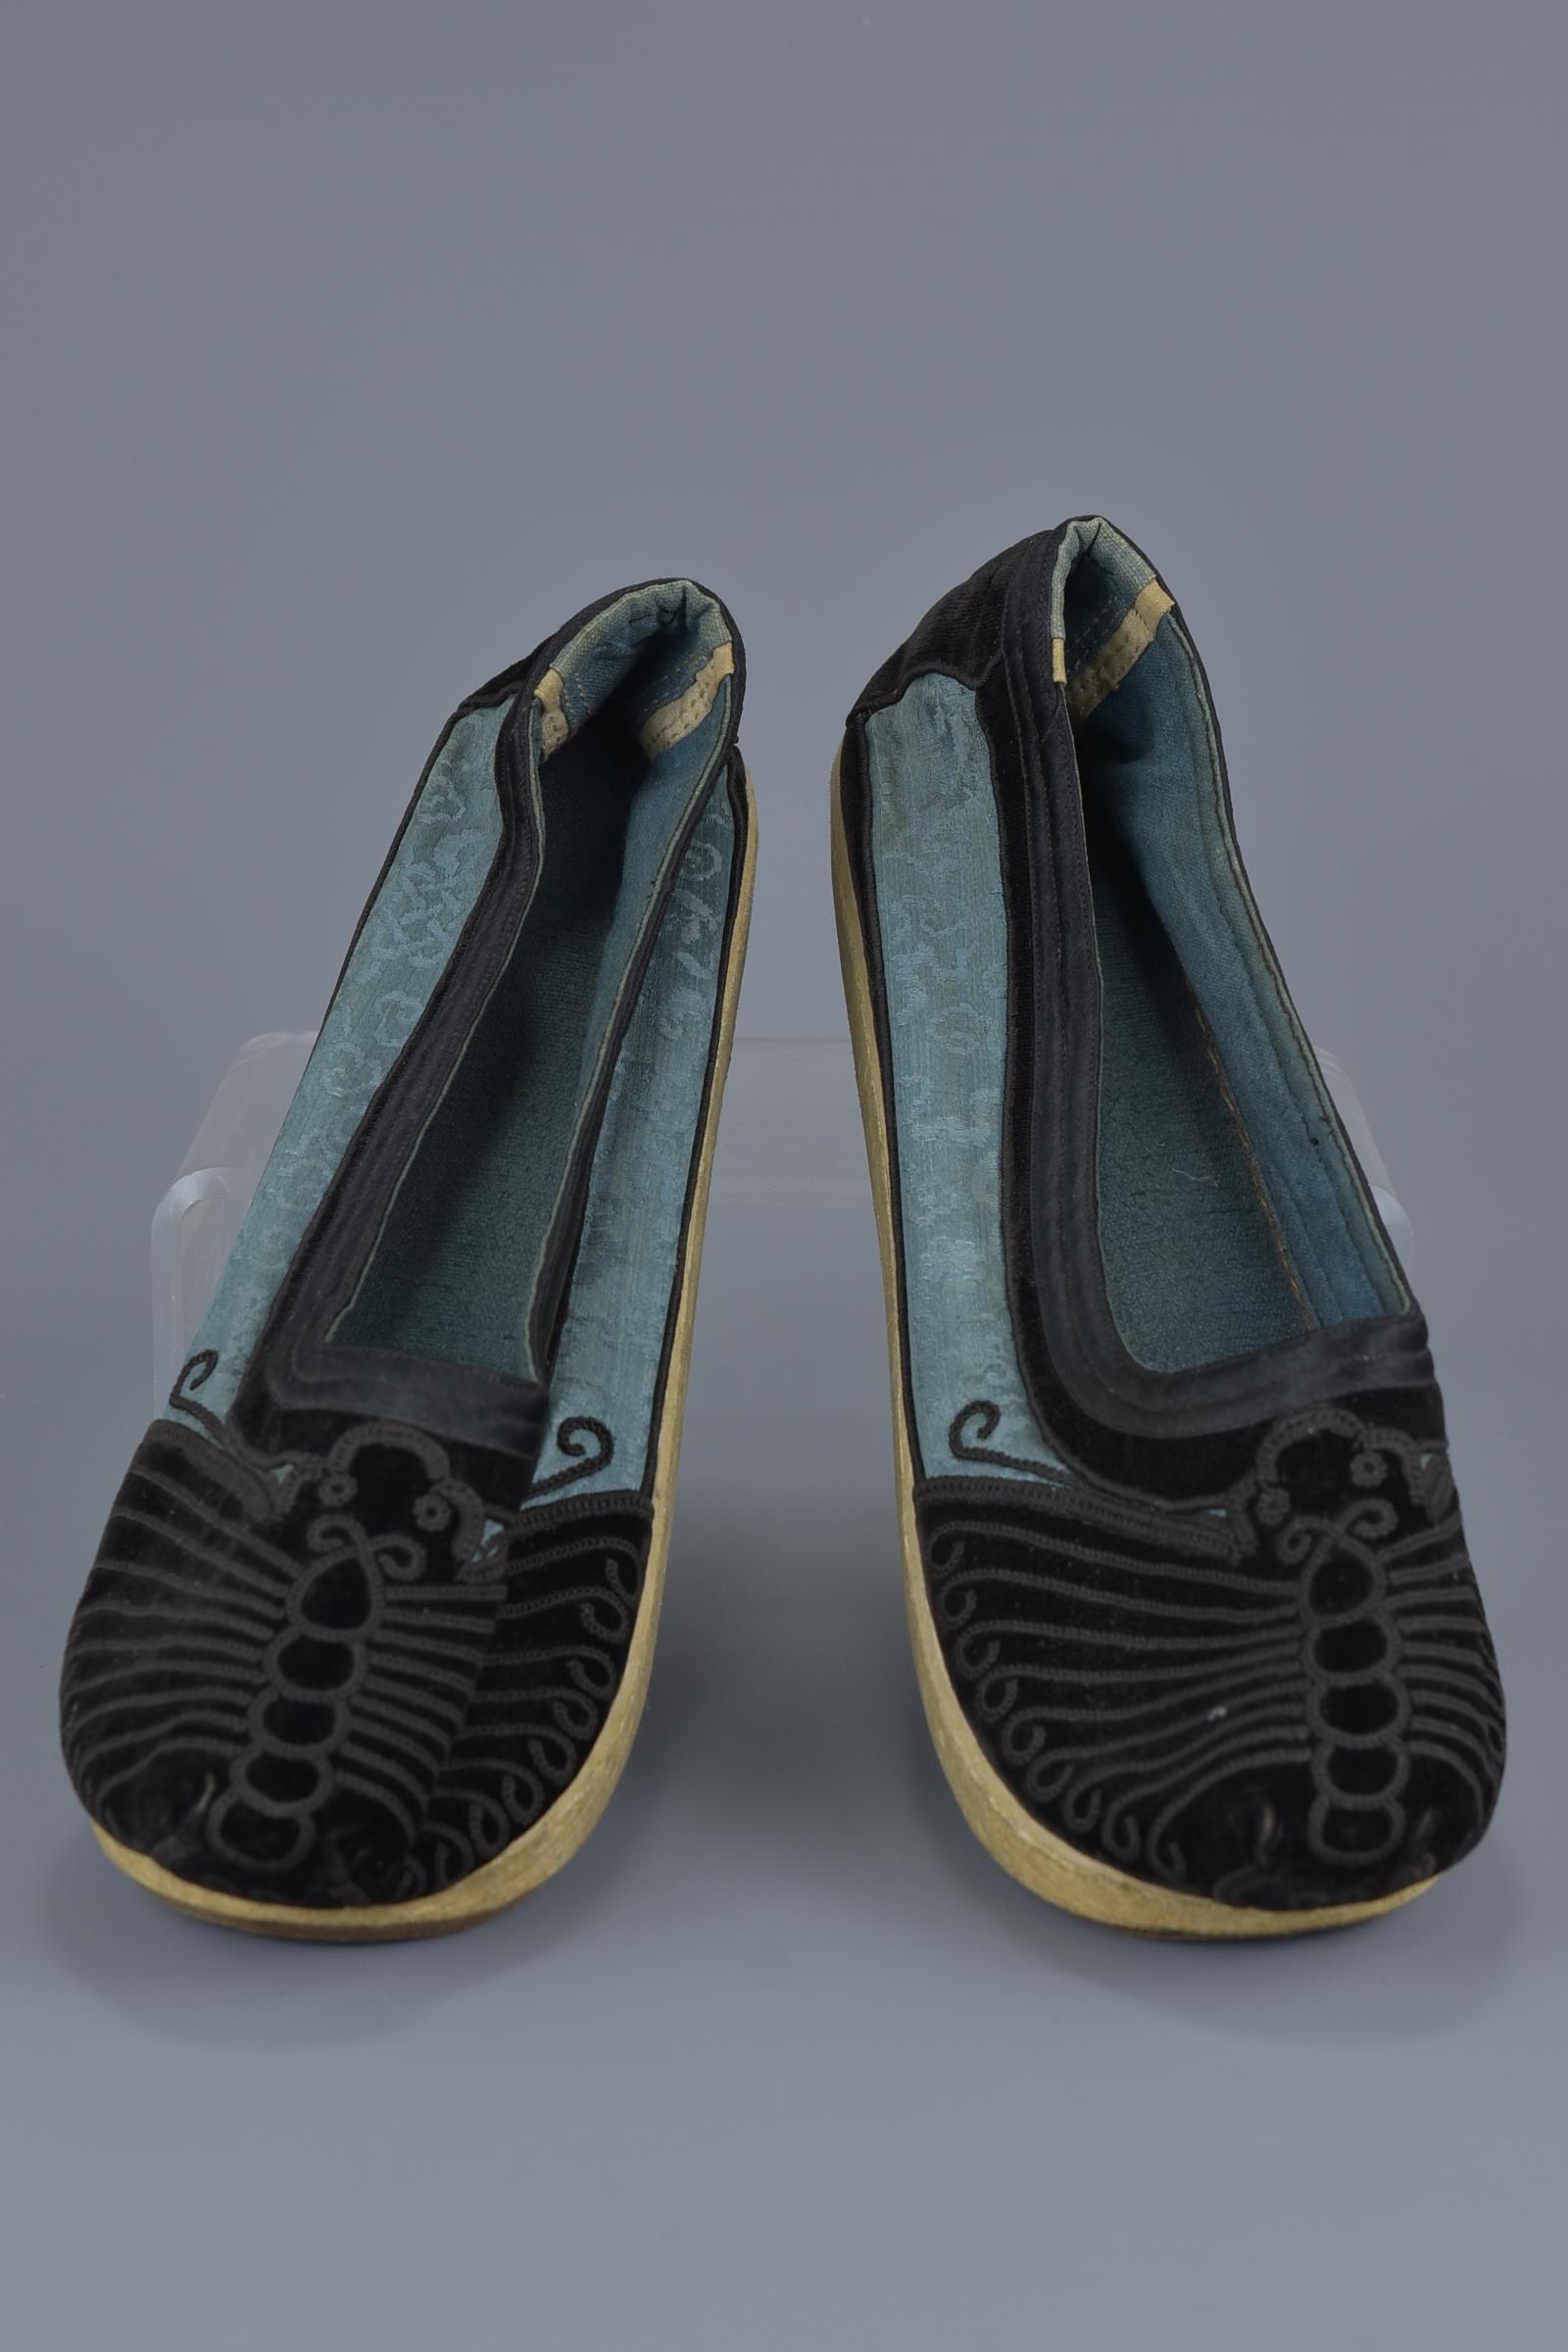 A pair of Chinese 19/20th century men's shoes in black with butterfly design to the toe and blue sil - Image 2 of 4